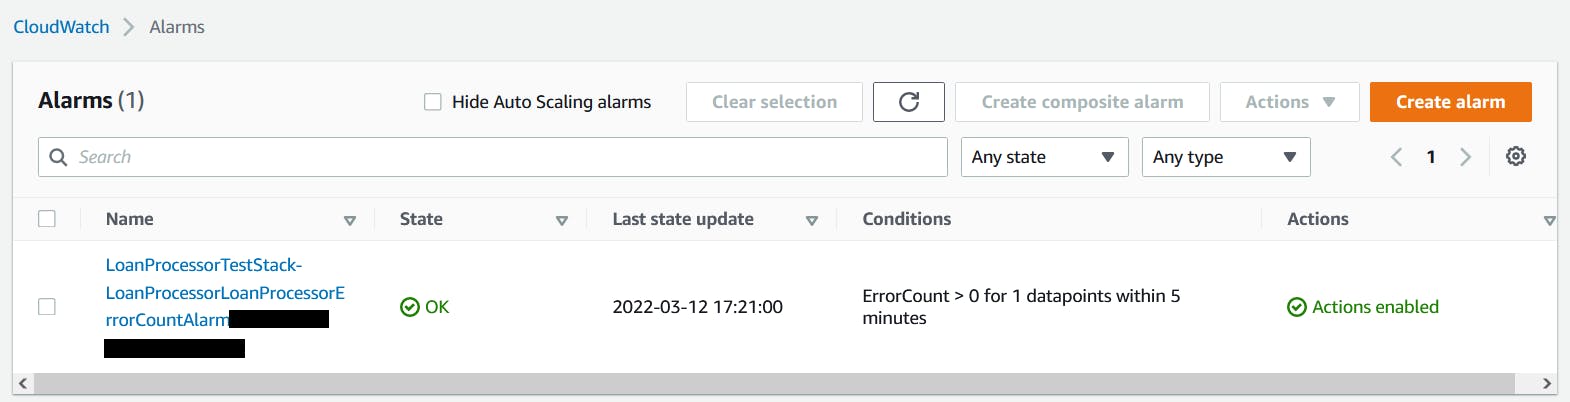 AWS Console showing CDK alarm